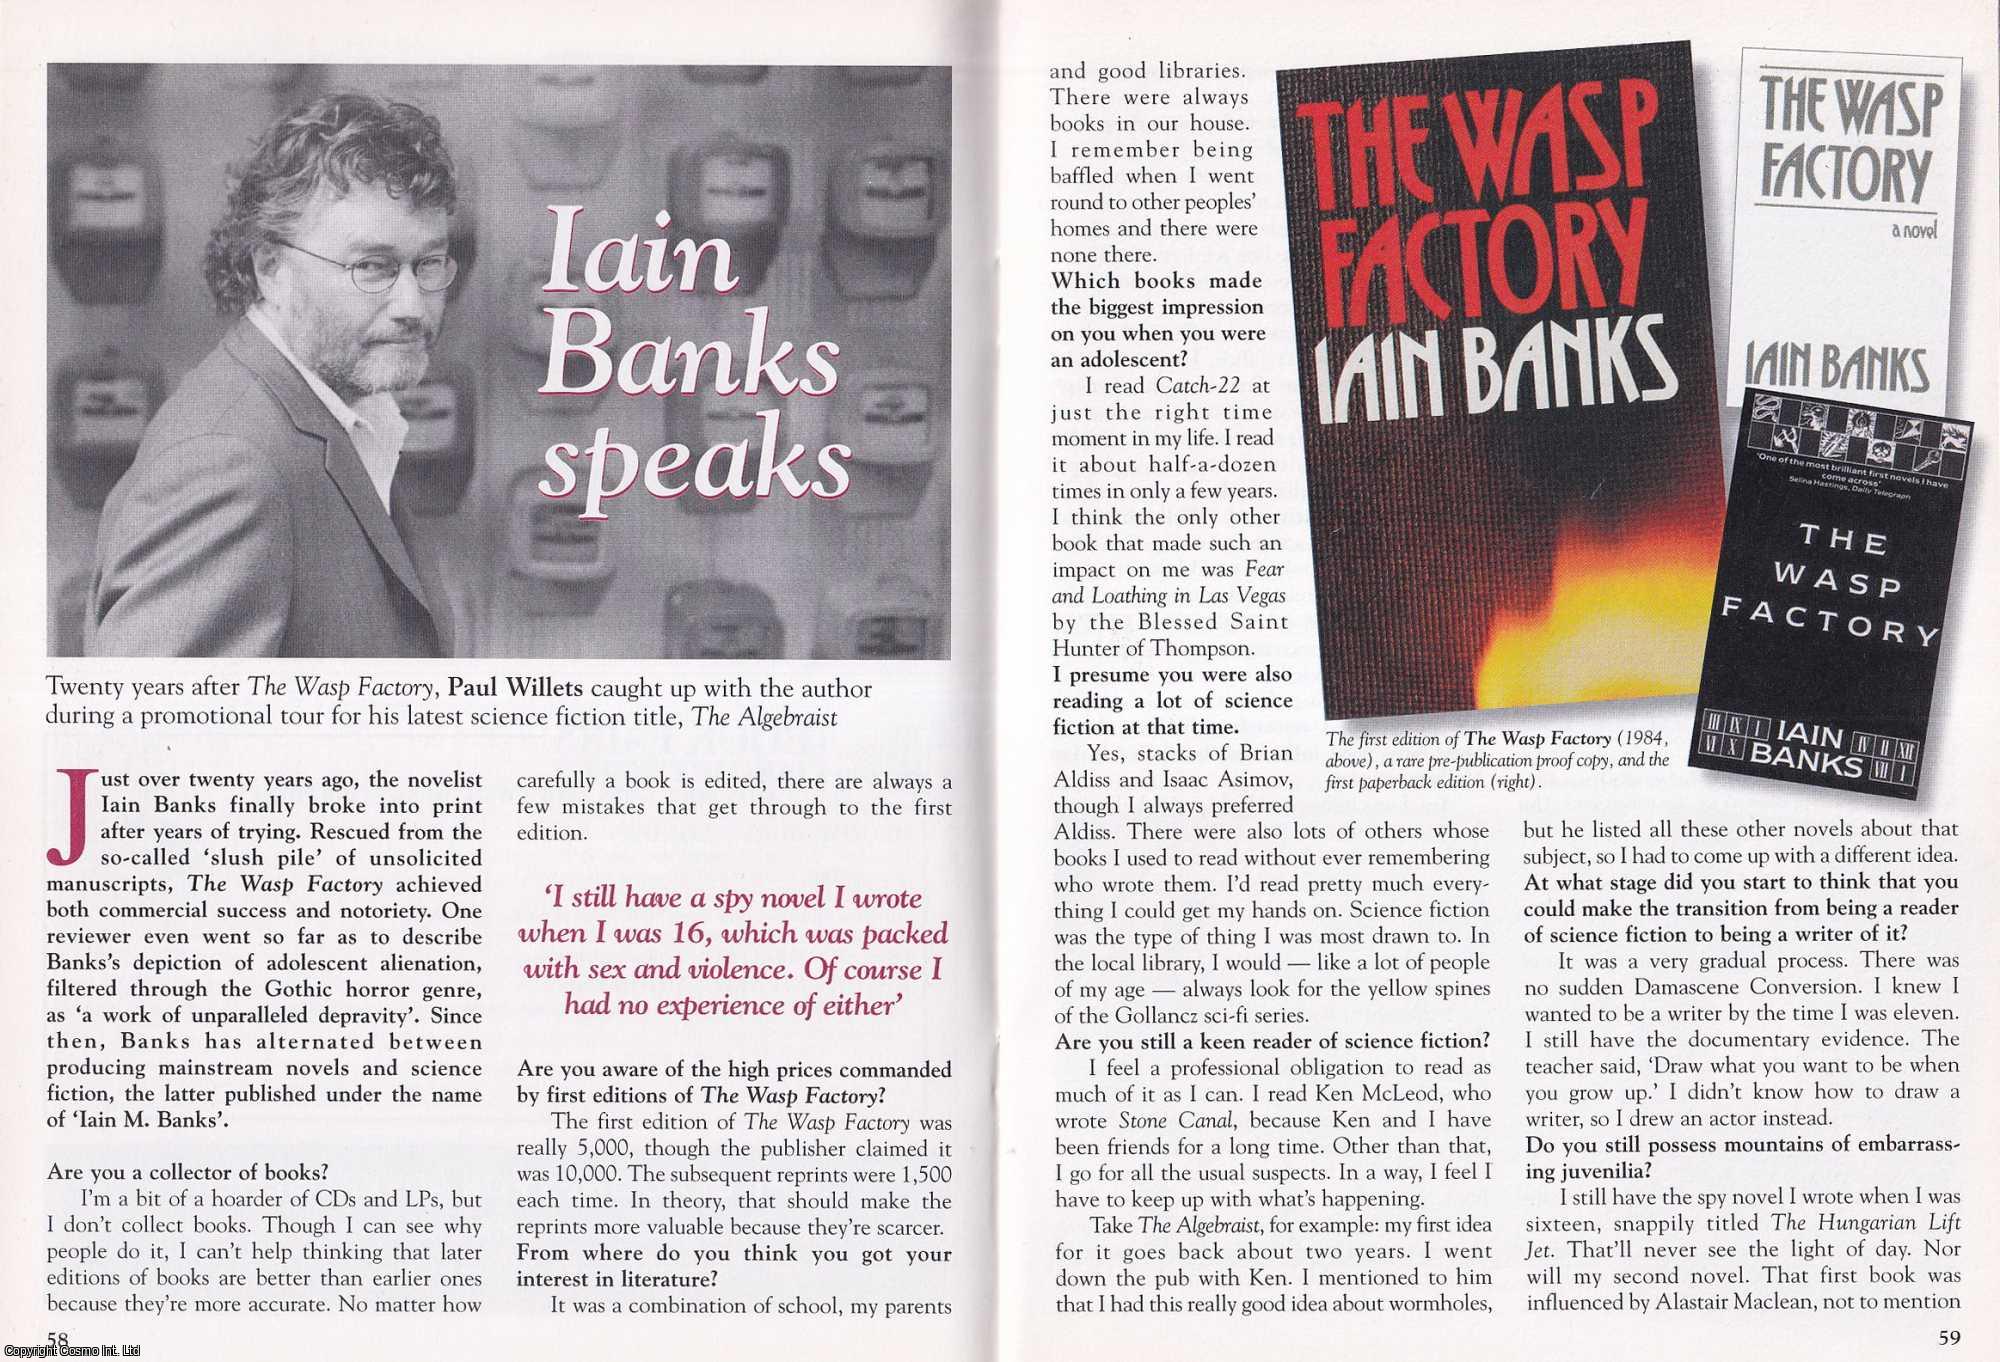 Paul Willets - Iain Banks Speaks. Catching up with The Author During a Promotional Tour for his Latest Science Fiction Title, The Algebraist. This is an original article separated from an issue of The Book & Magazine Collector publication.